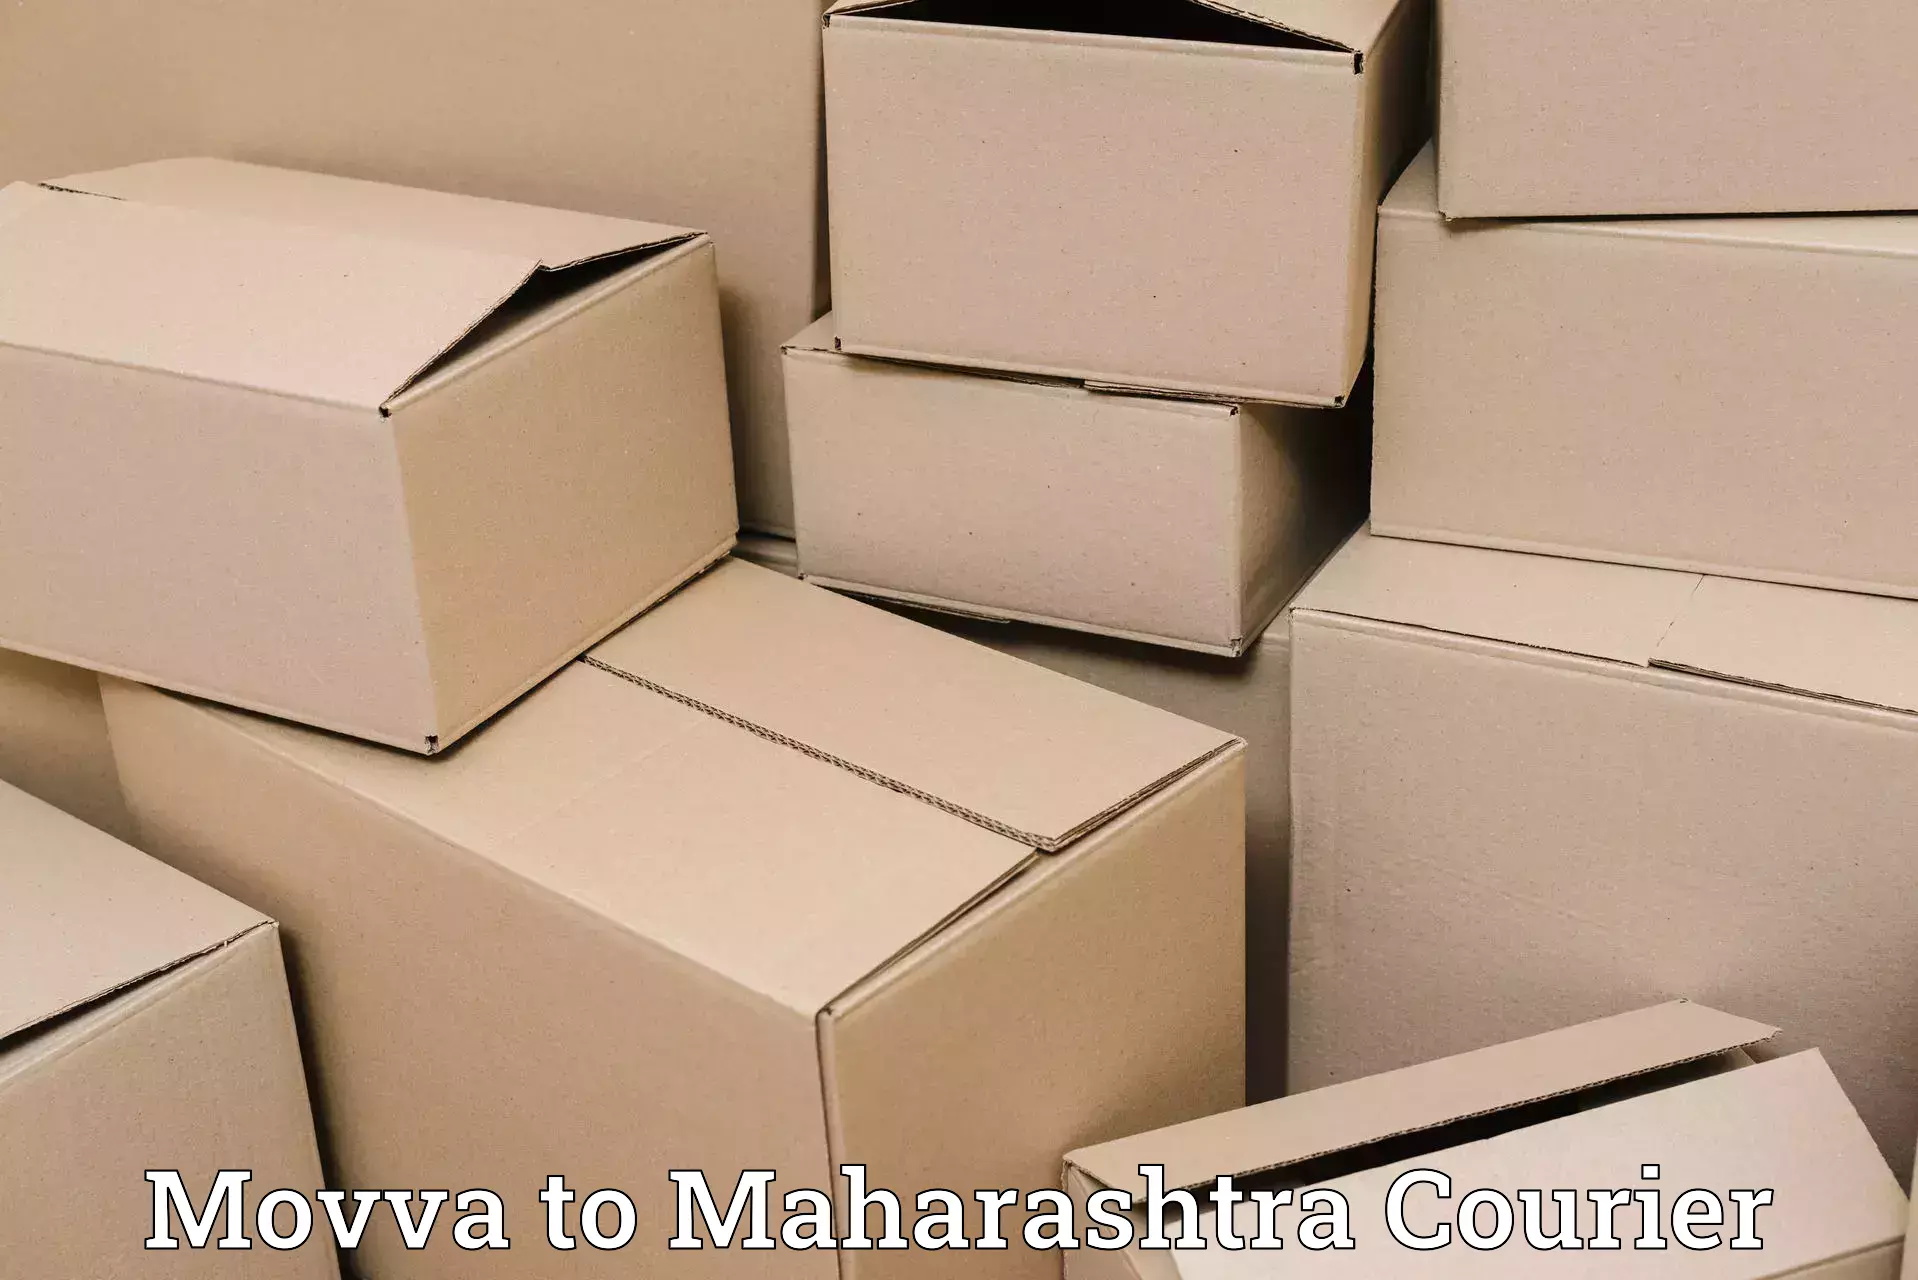 Affordable parcel service Movva to Ghatanji